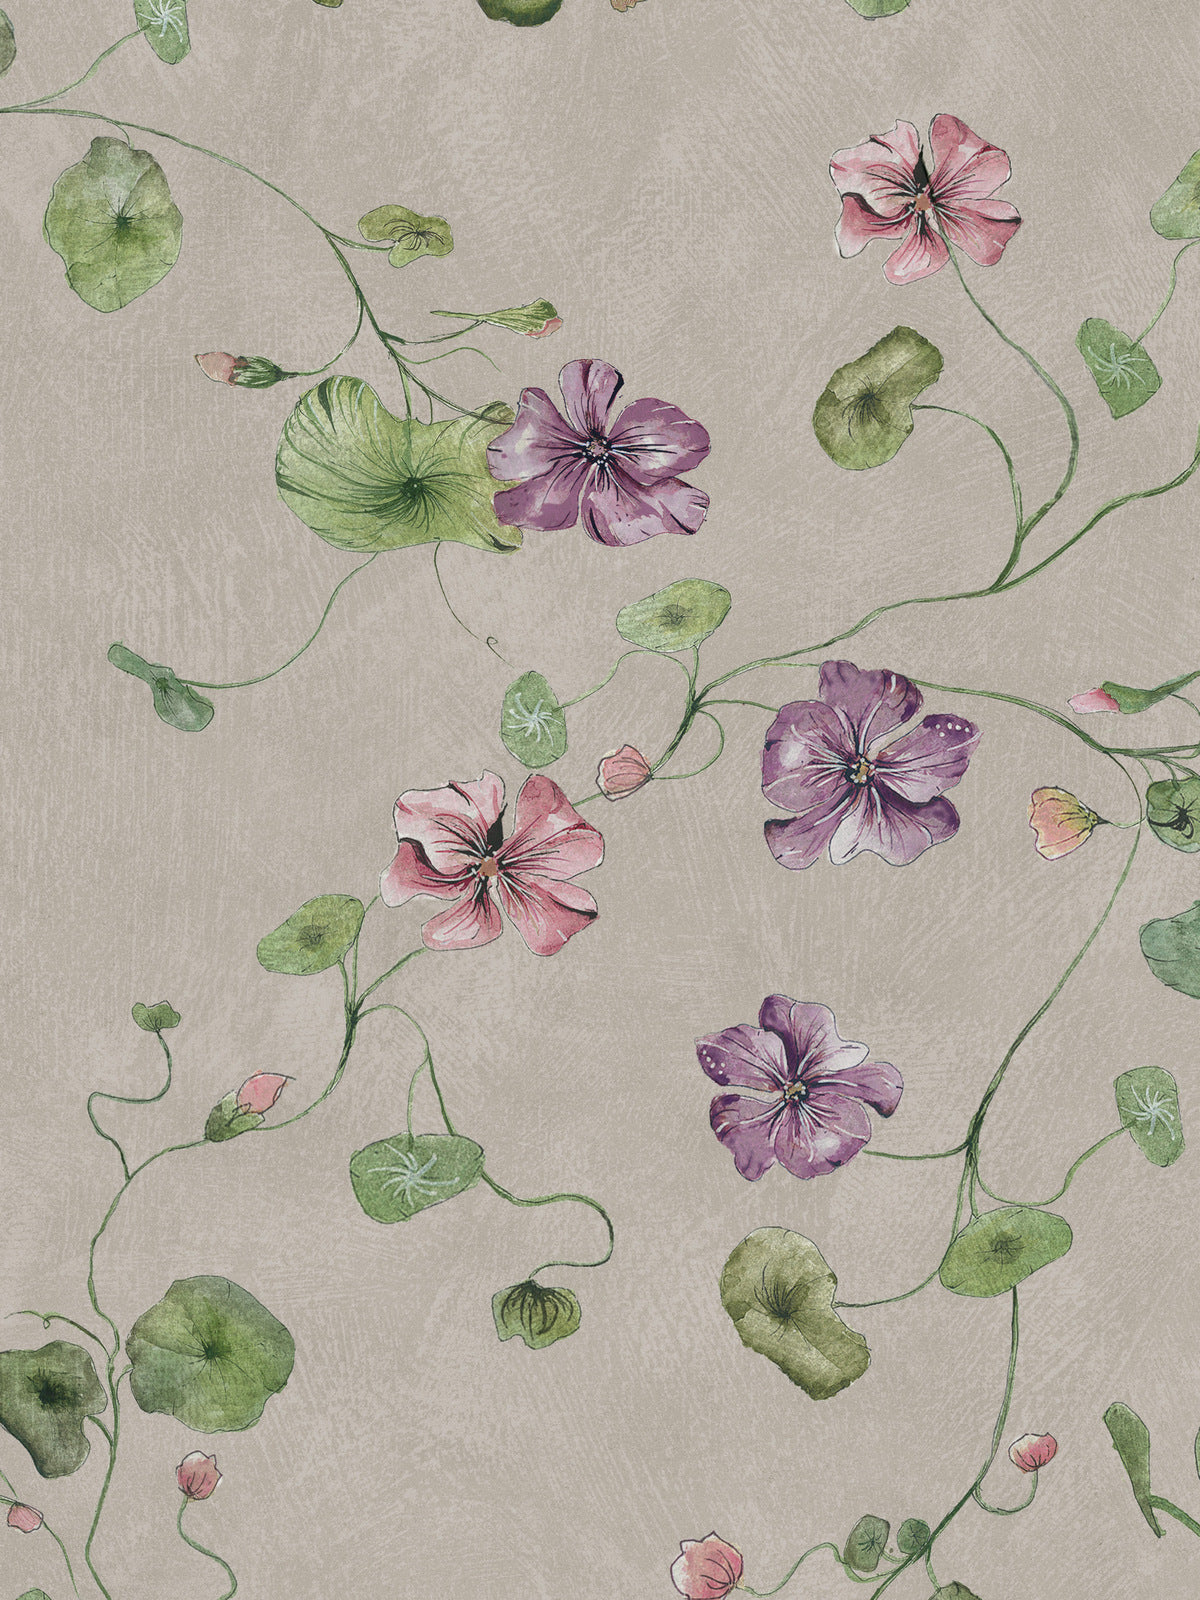 Violetta is a cozy, floral wallpaper, covered with delicate yet vibrant nasturtium flowers in pink and violet on a warm gray background, resembling a lime wall. 